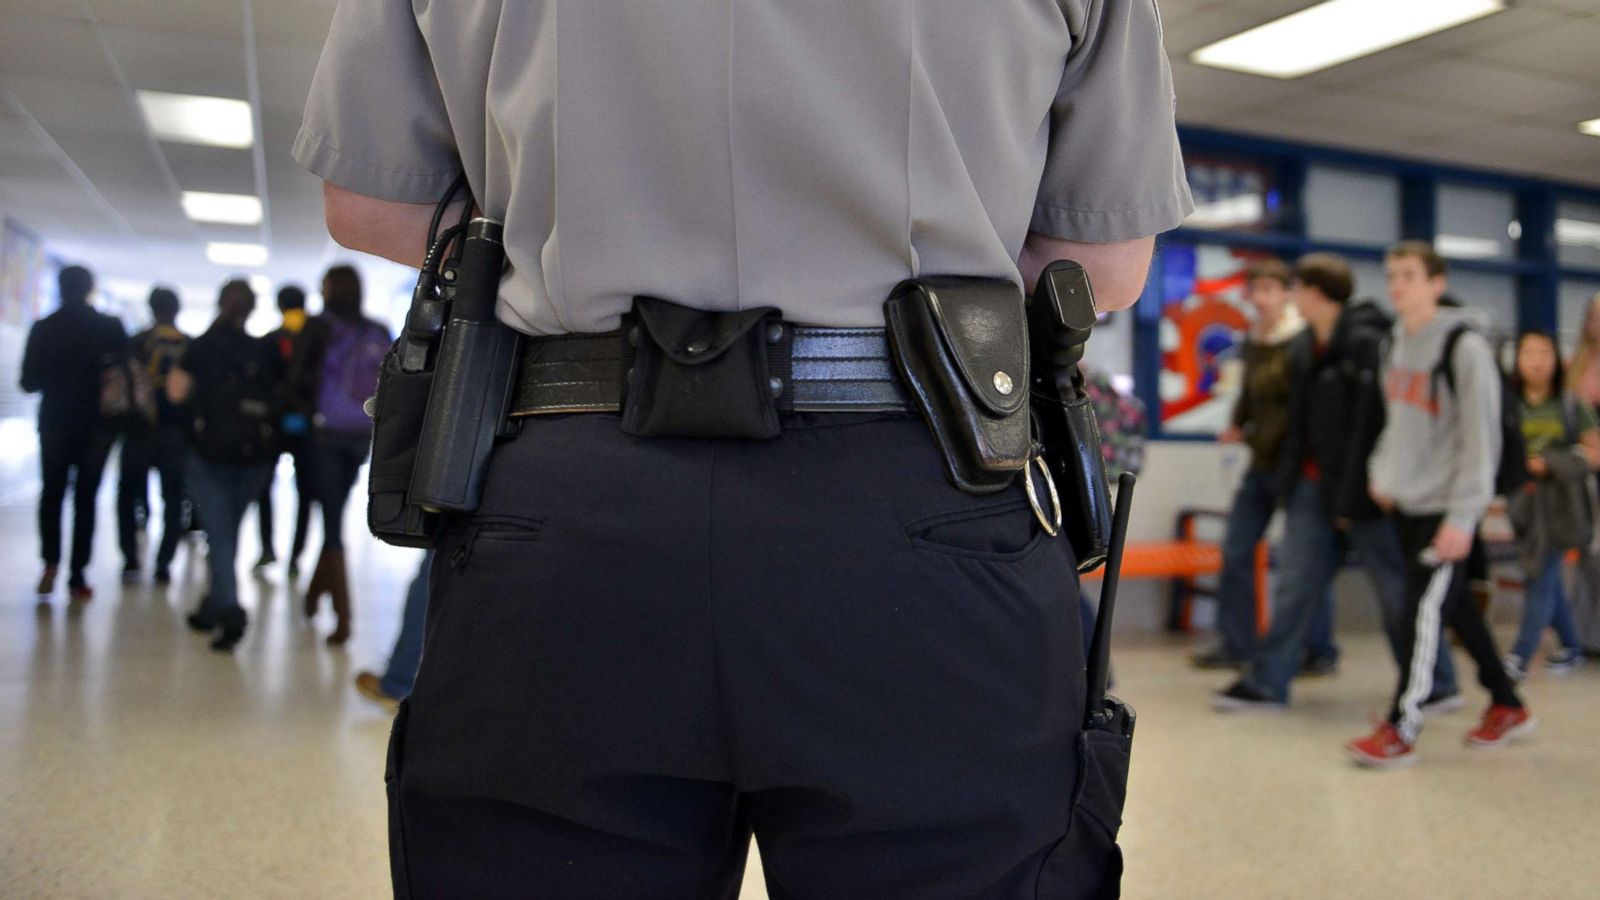 Armed security officers in schools